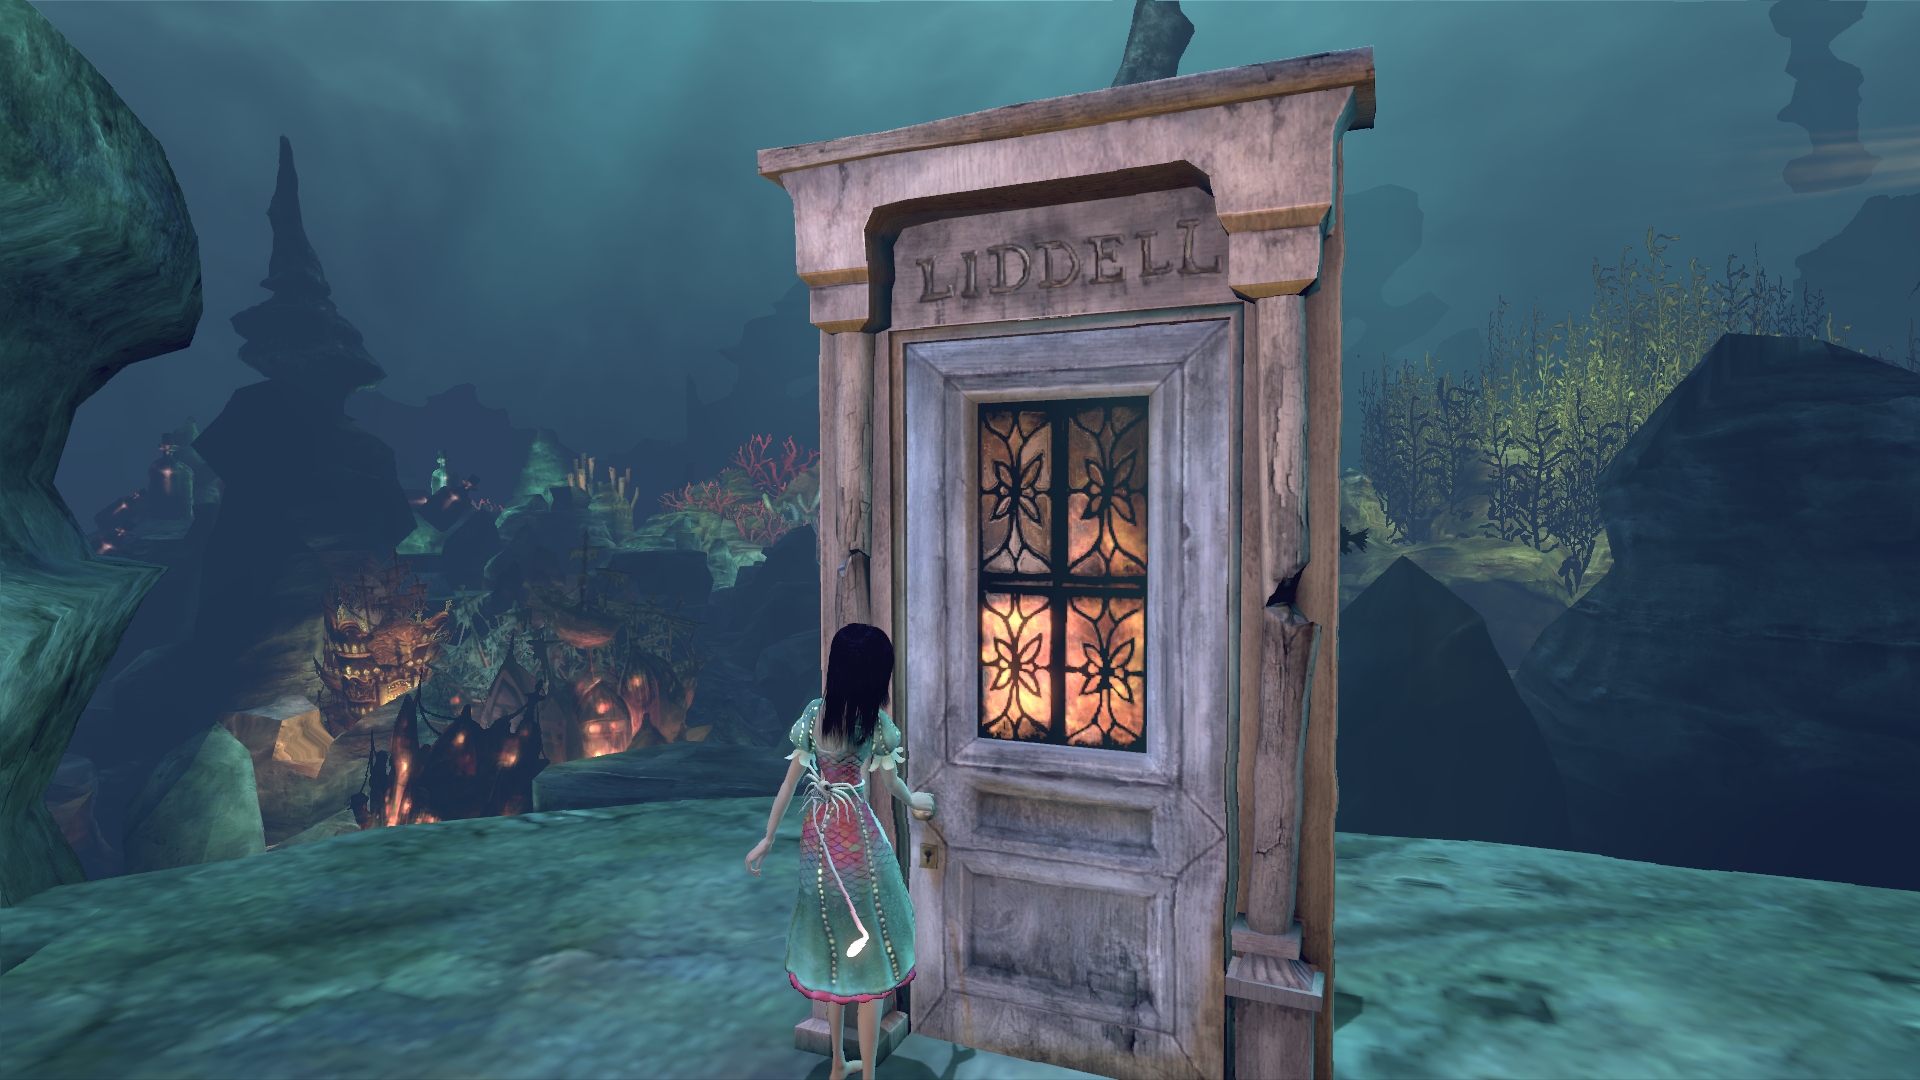 Alice Madness Return - [The Sims 2] (16) by AliceYuric on DeviantArt